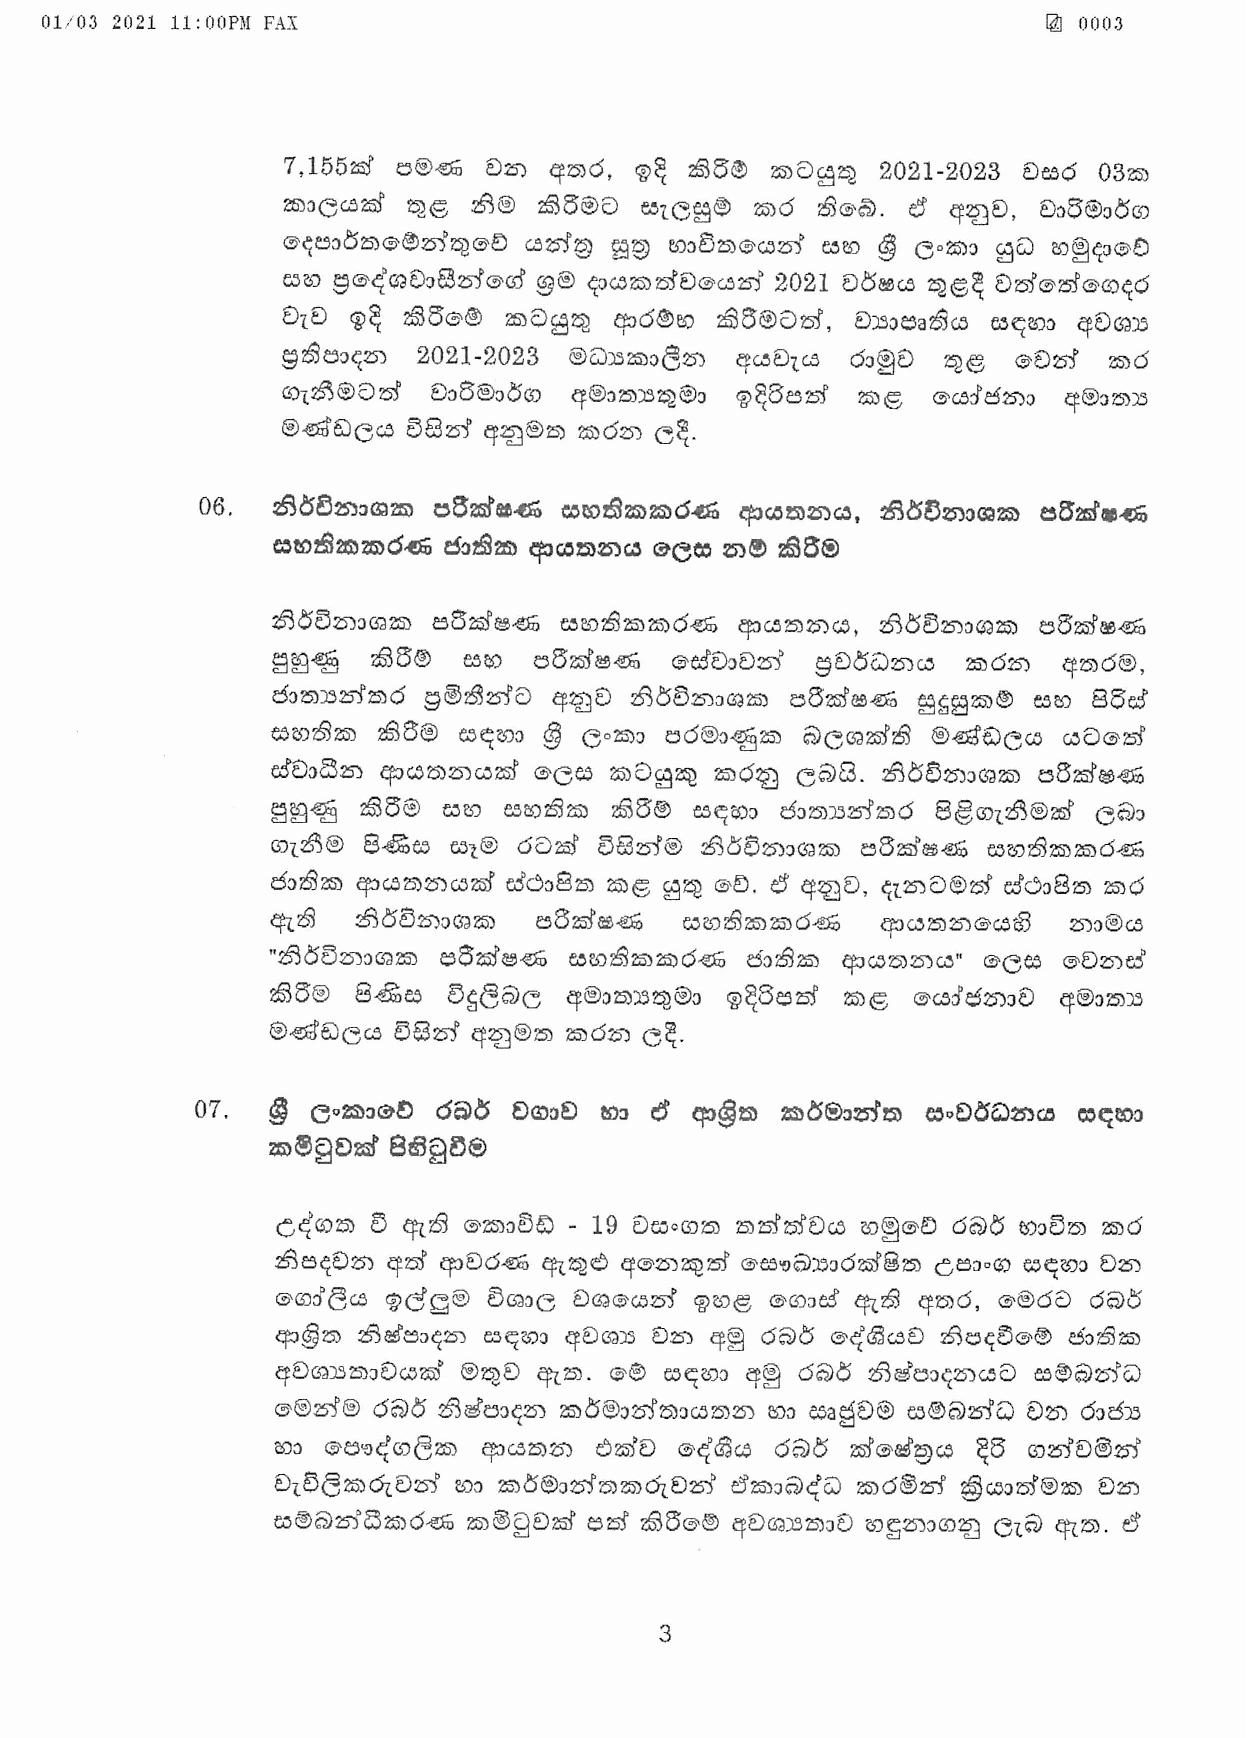 Cabinet Decision on 01.03.2021 page 003